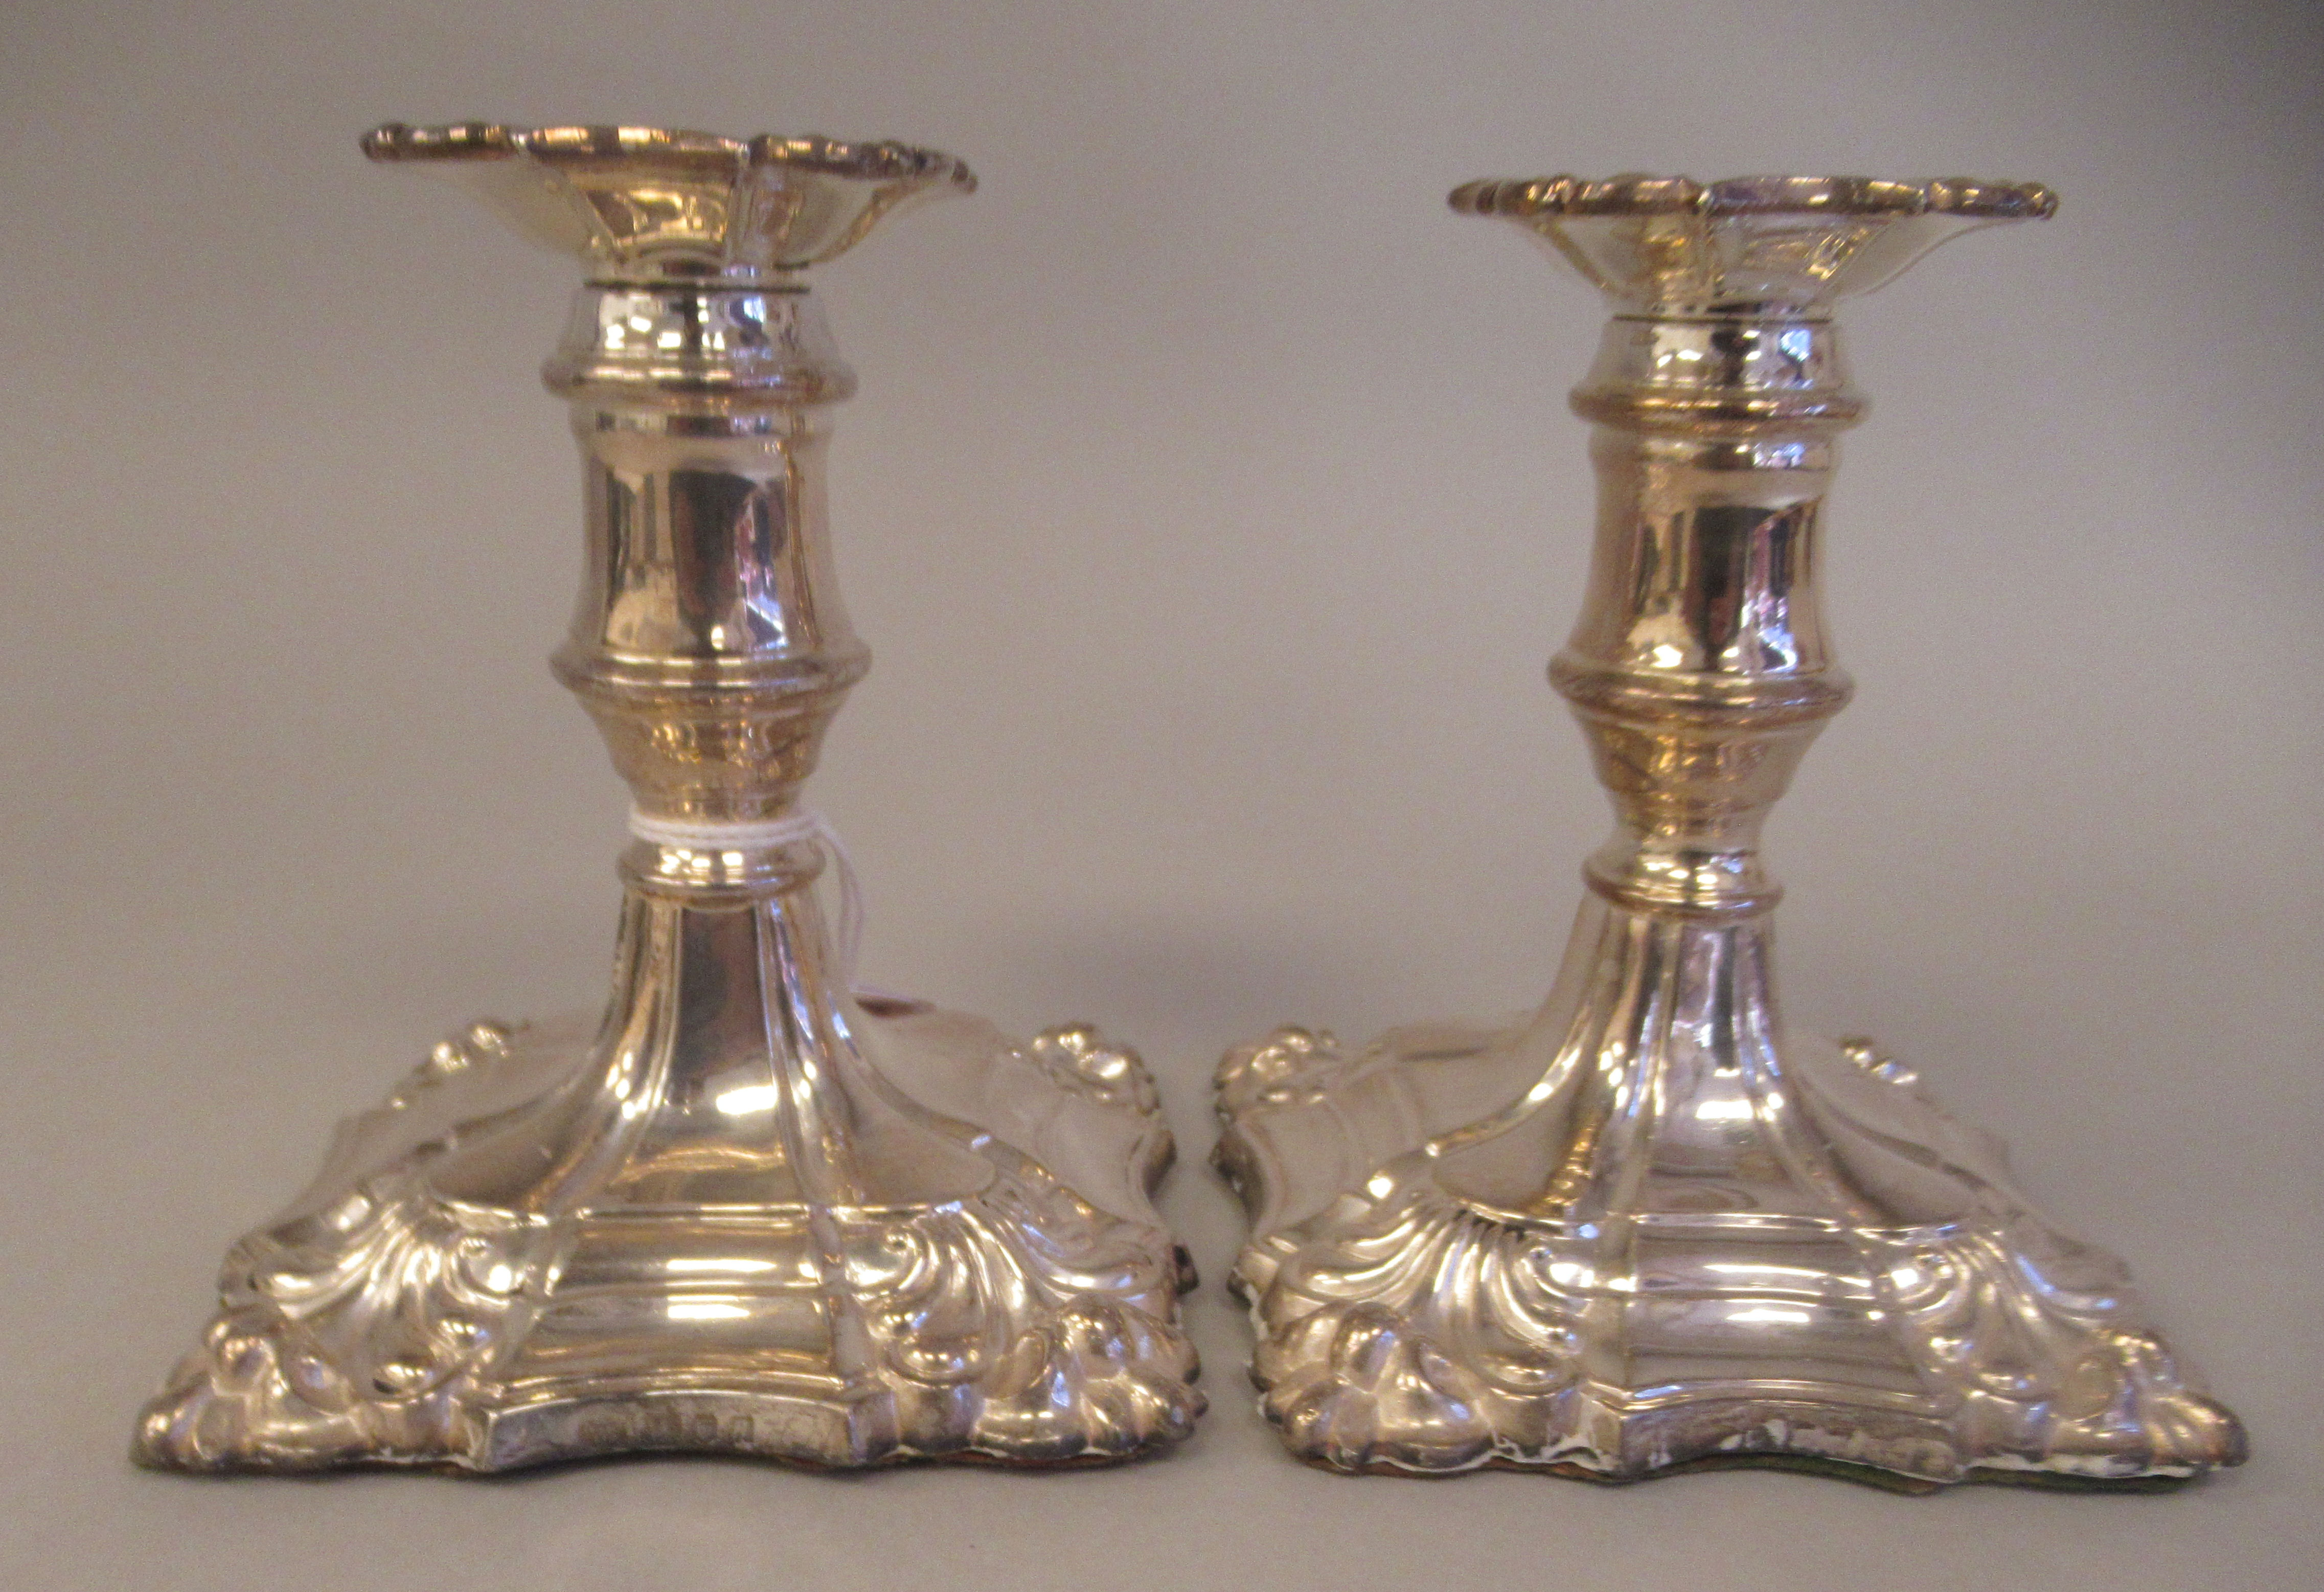 A pair of 18/19thC style loaded silver dwarf candlesticks, each with a detachable sconce and vase - Image 3 of 7